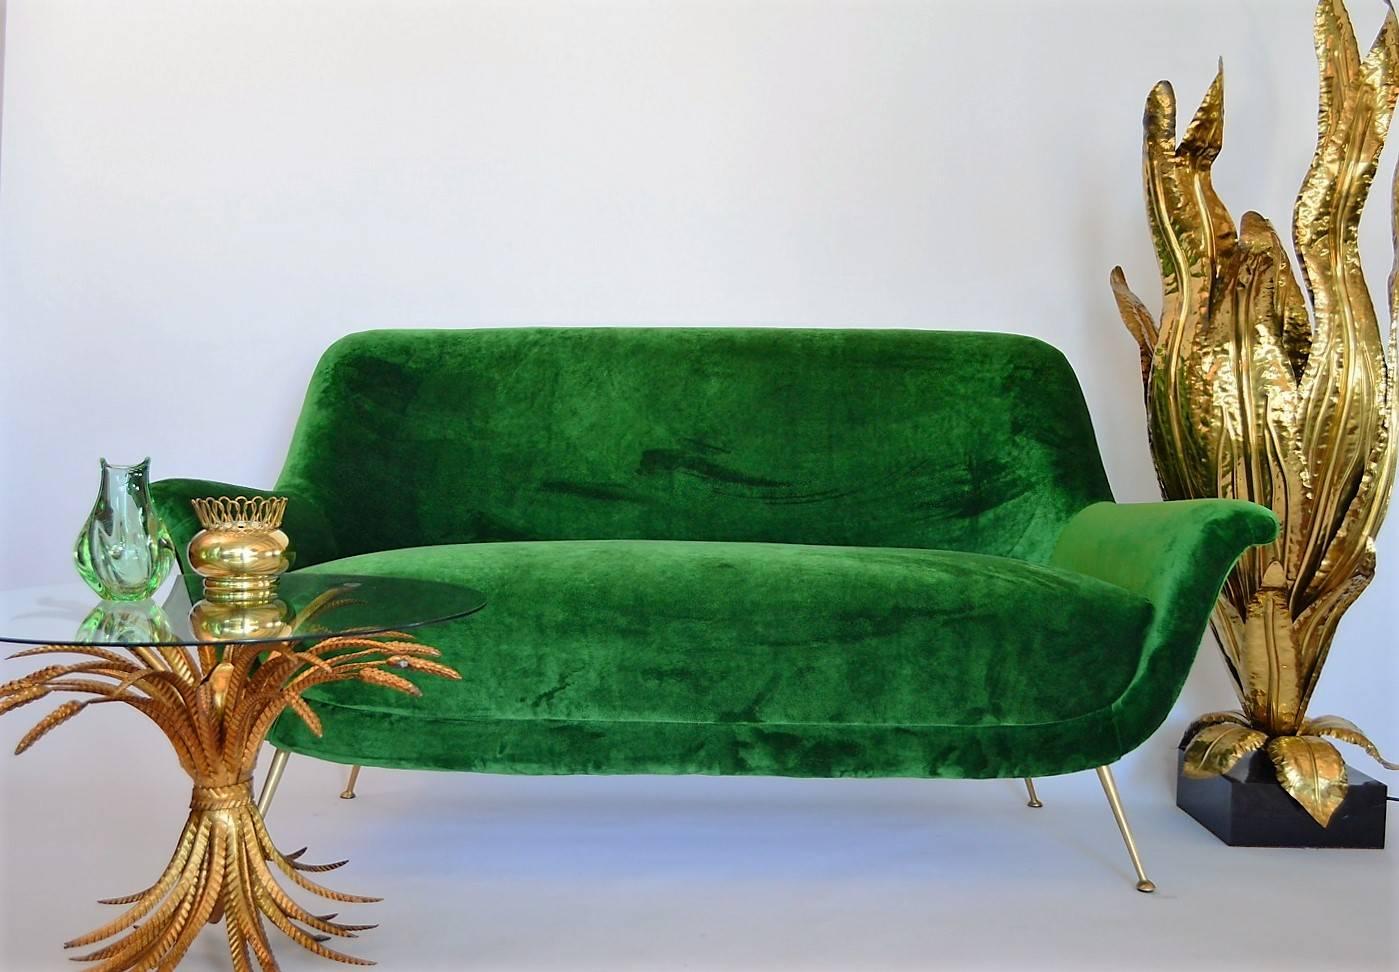 Gorgeous emerald green Italian sofa original from the 1950s.
Equipped with the original stiletto brass feet, which have been polished to shine again.
Internally completely restored with high quality material and externally reupholstered with soft